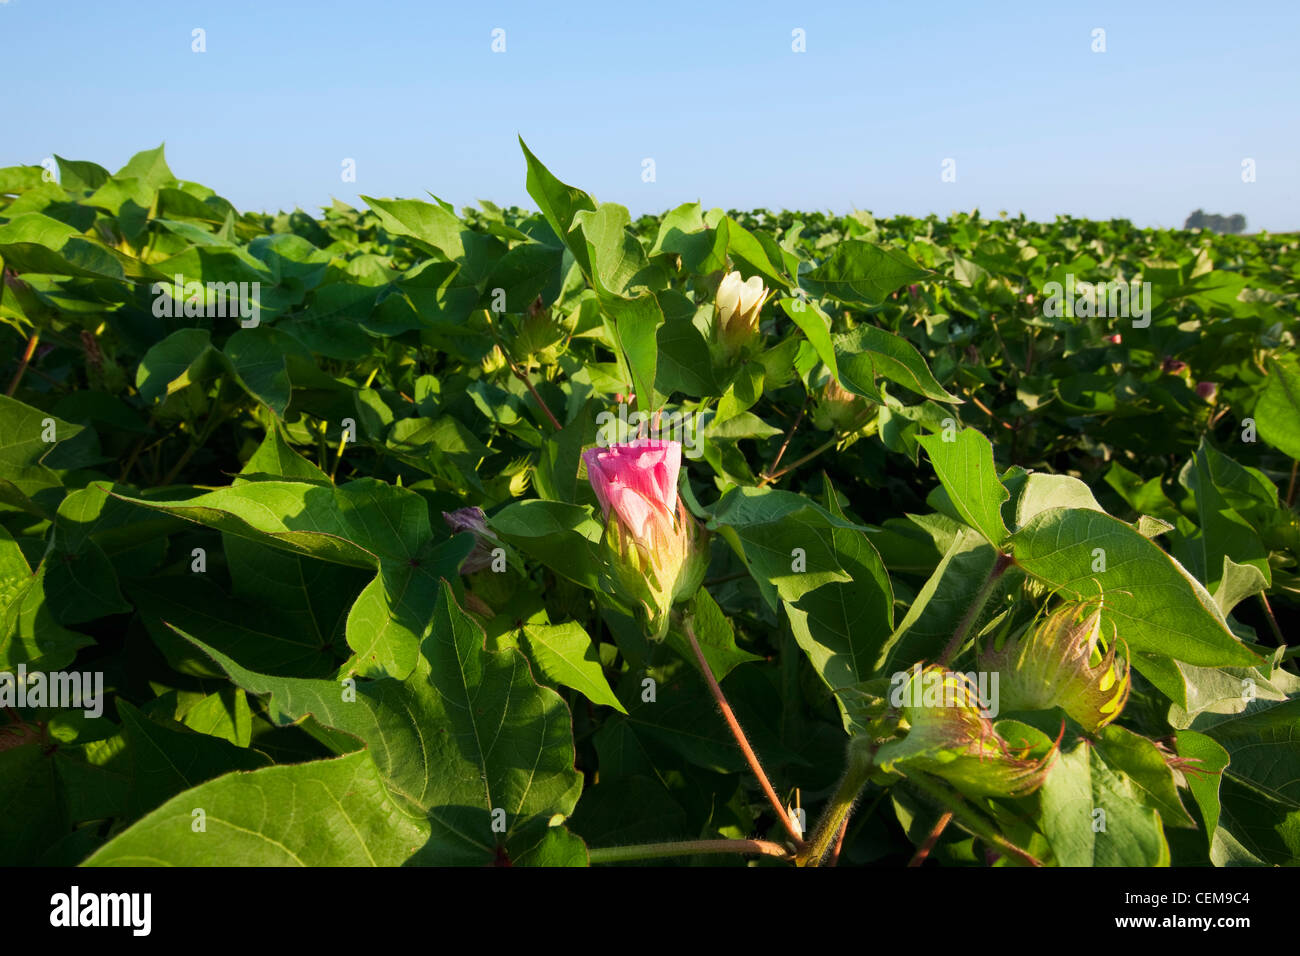 Closeup of mid growth cotton plants in advanced stage of fruit set showing pink and white blossoms and green squares / Arkansas. Stock Photo